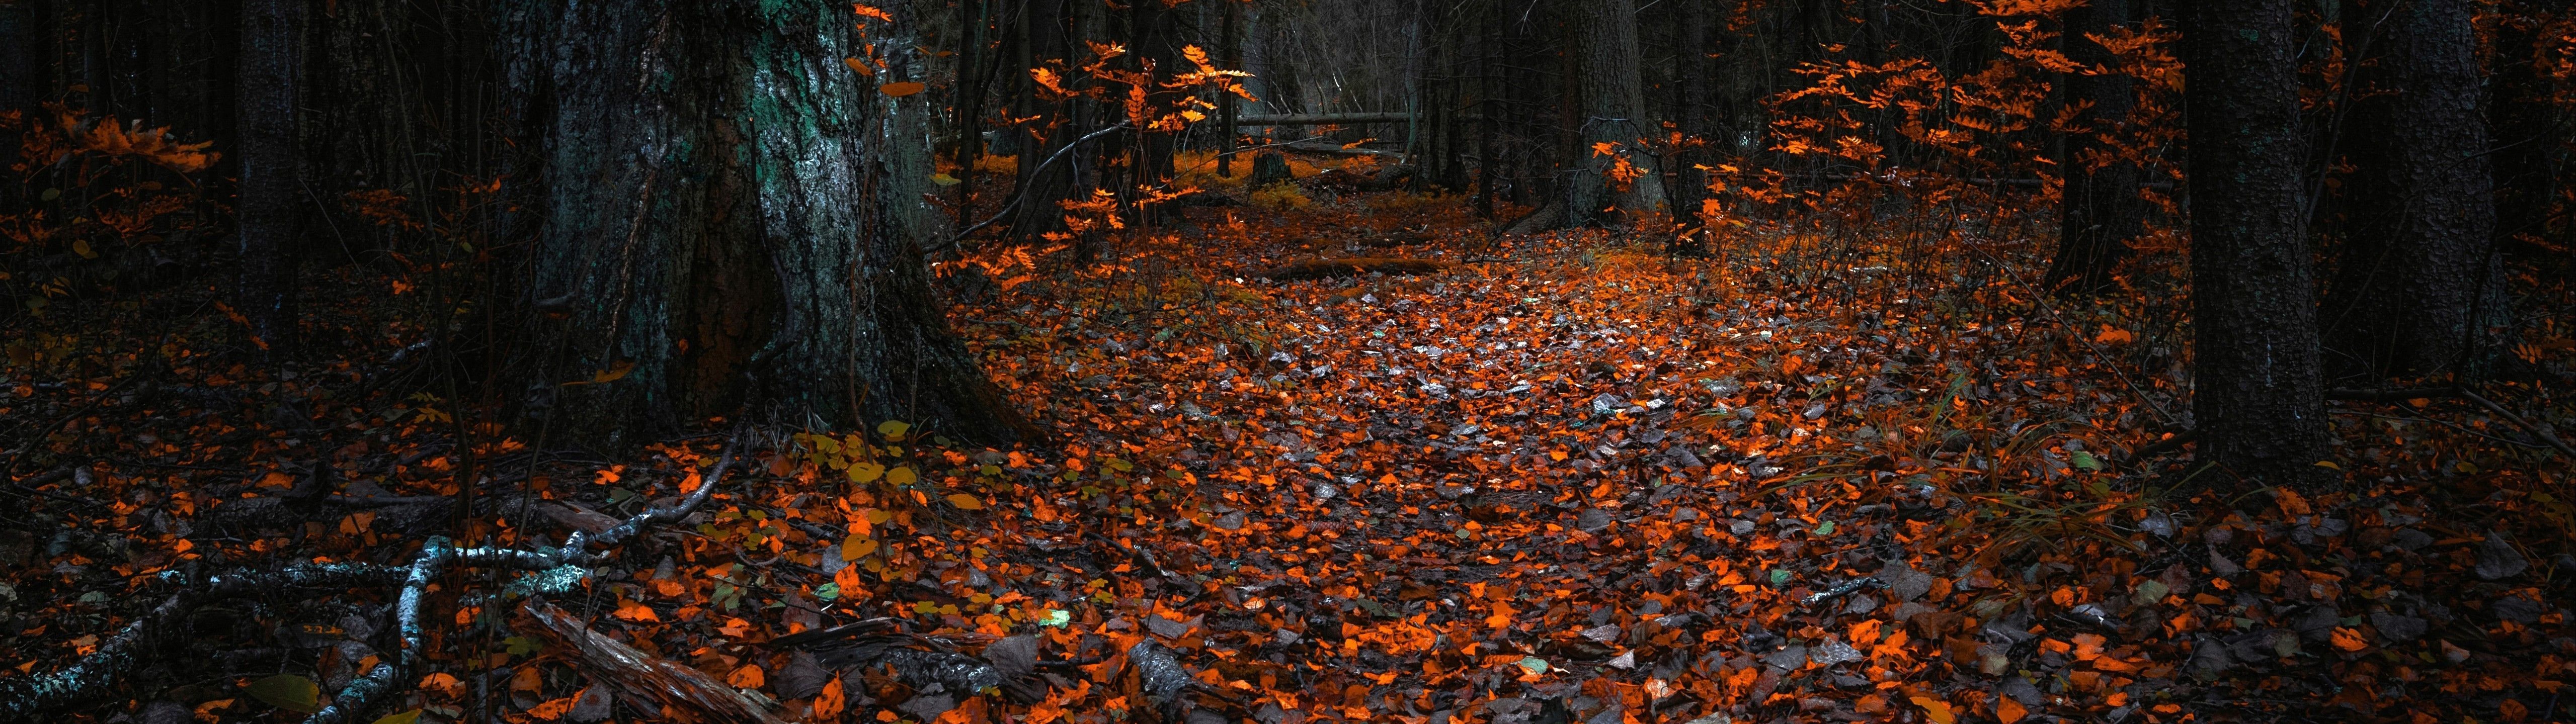 A path in the woods with orange leaves on the ground - 5120x1440